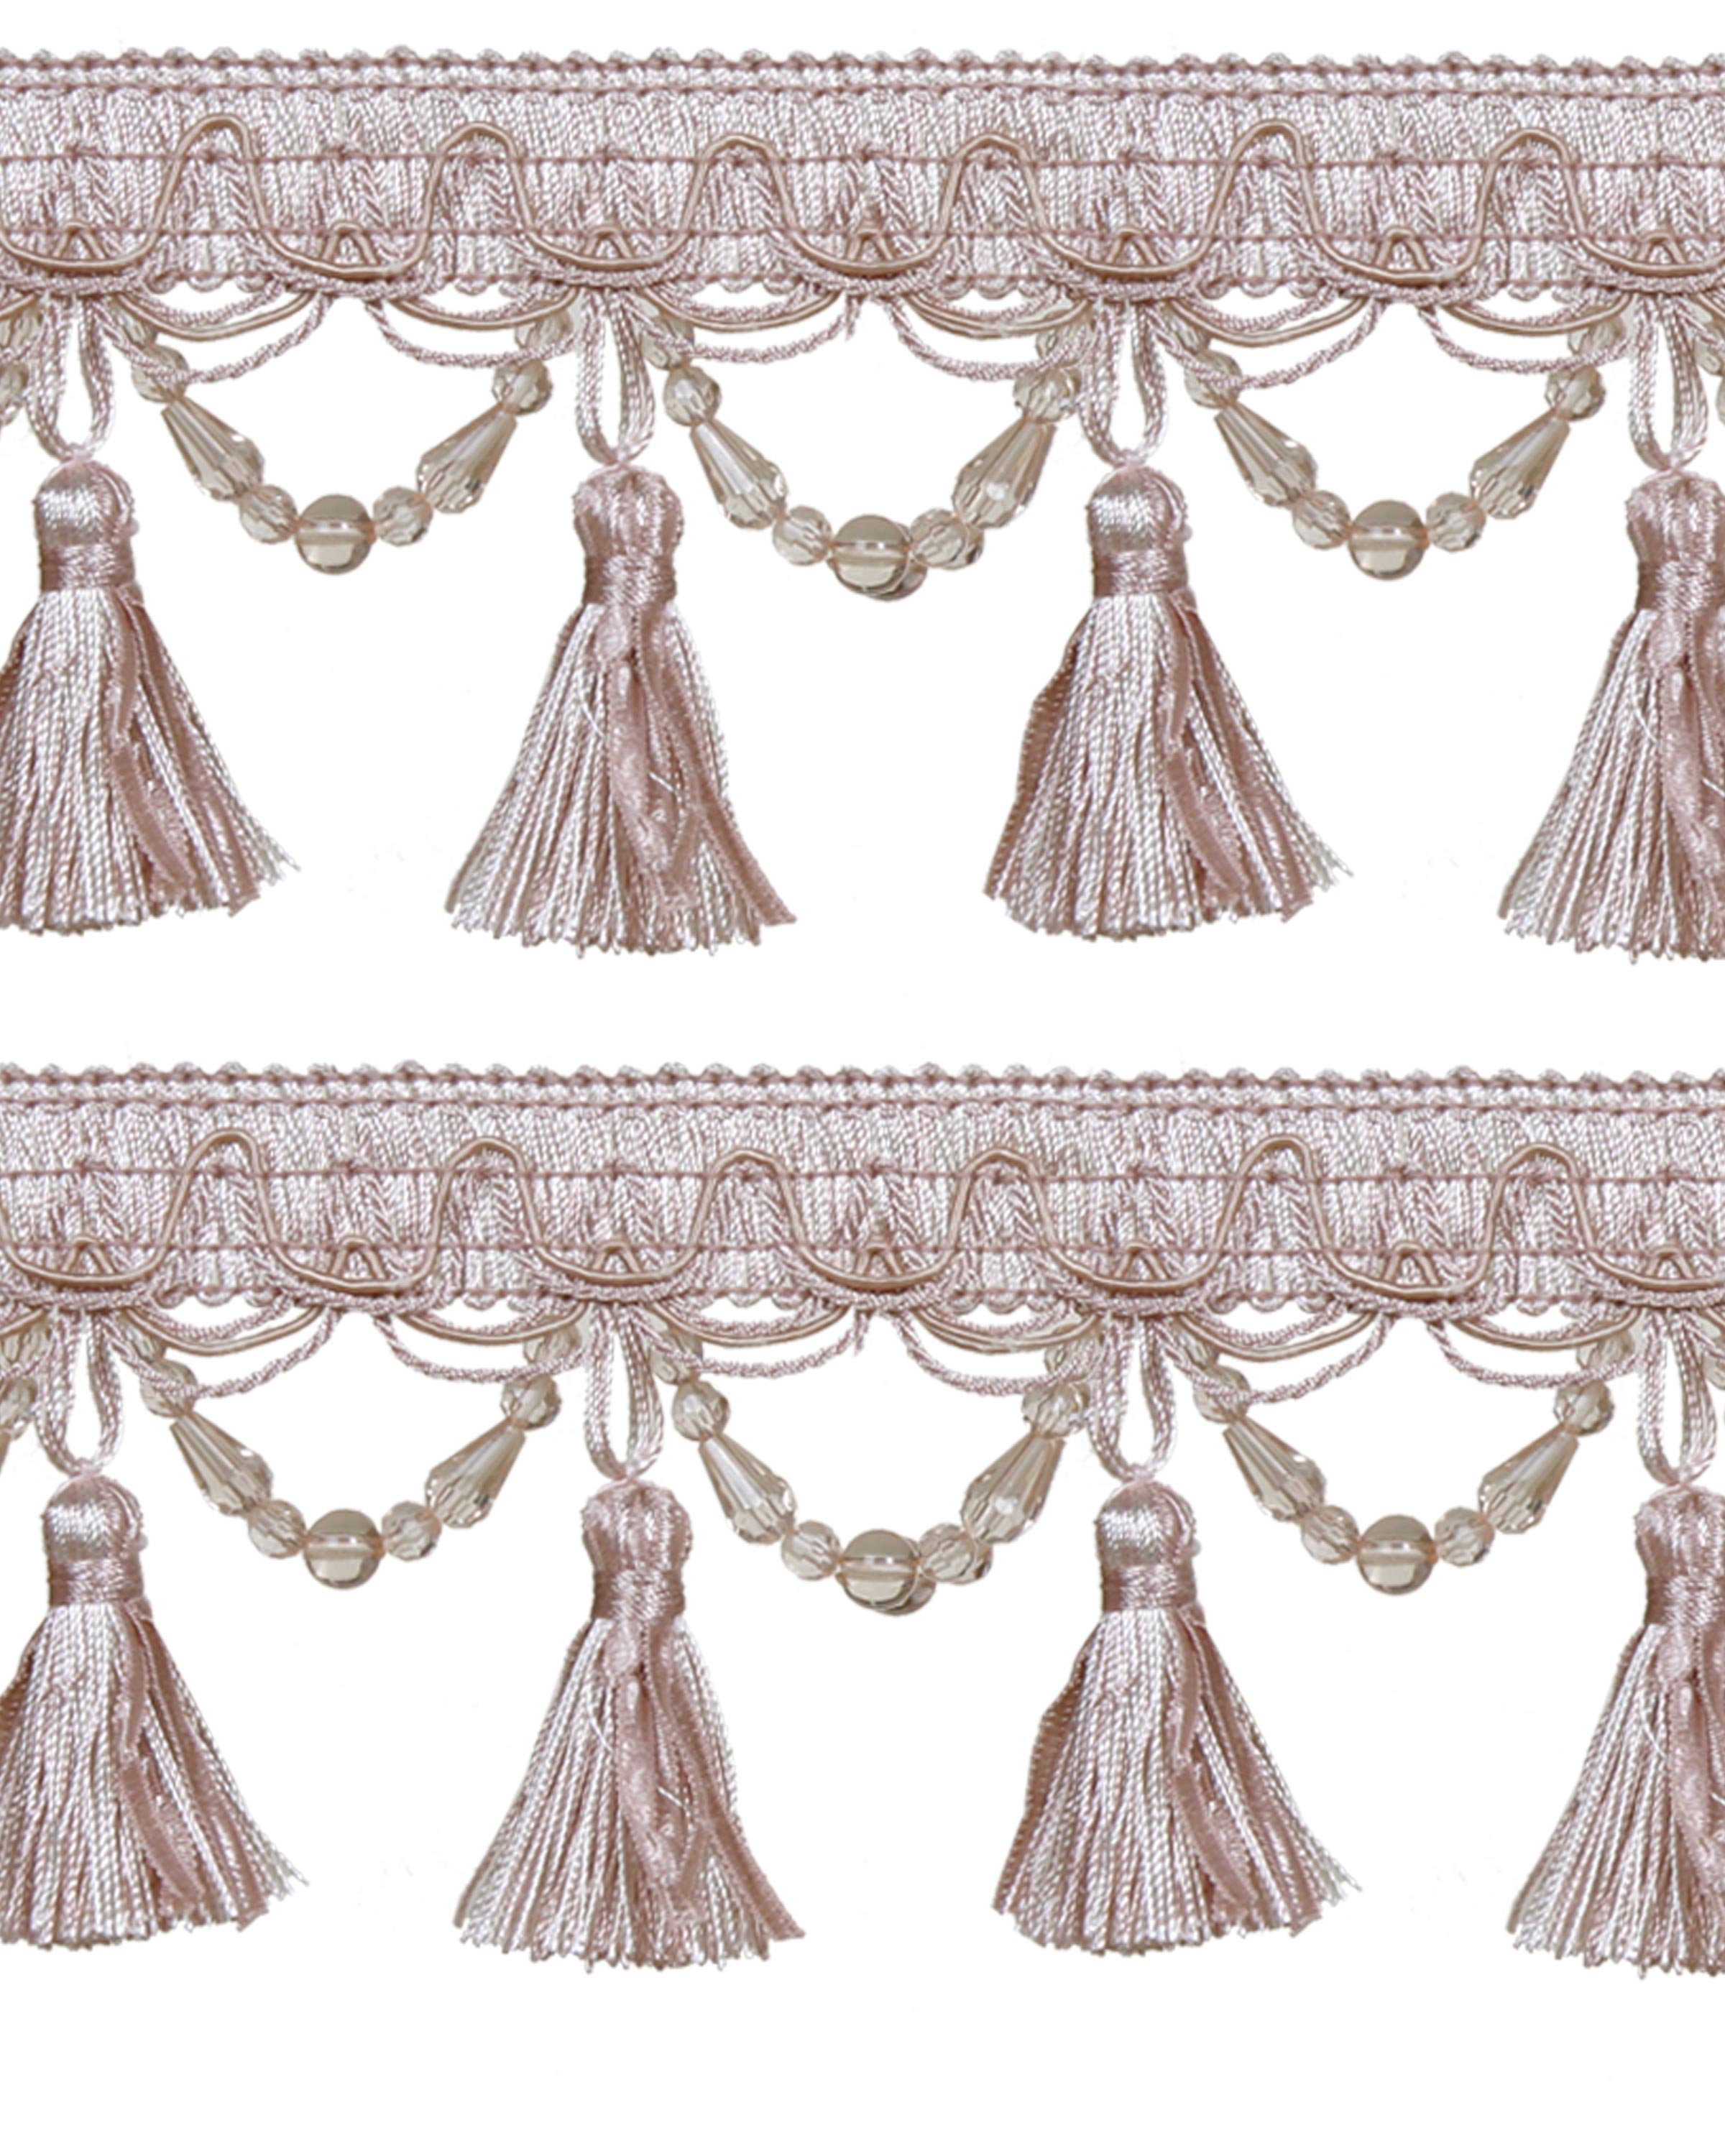 Fringe Tassels with Scalloped Bead Drop - Pink / Cream 90mm Price is per 5 metres